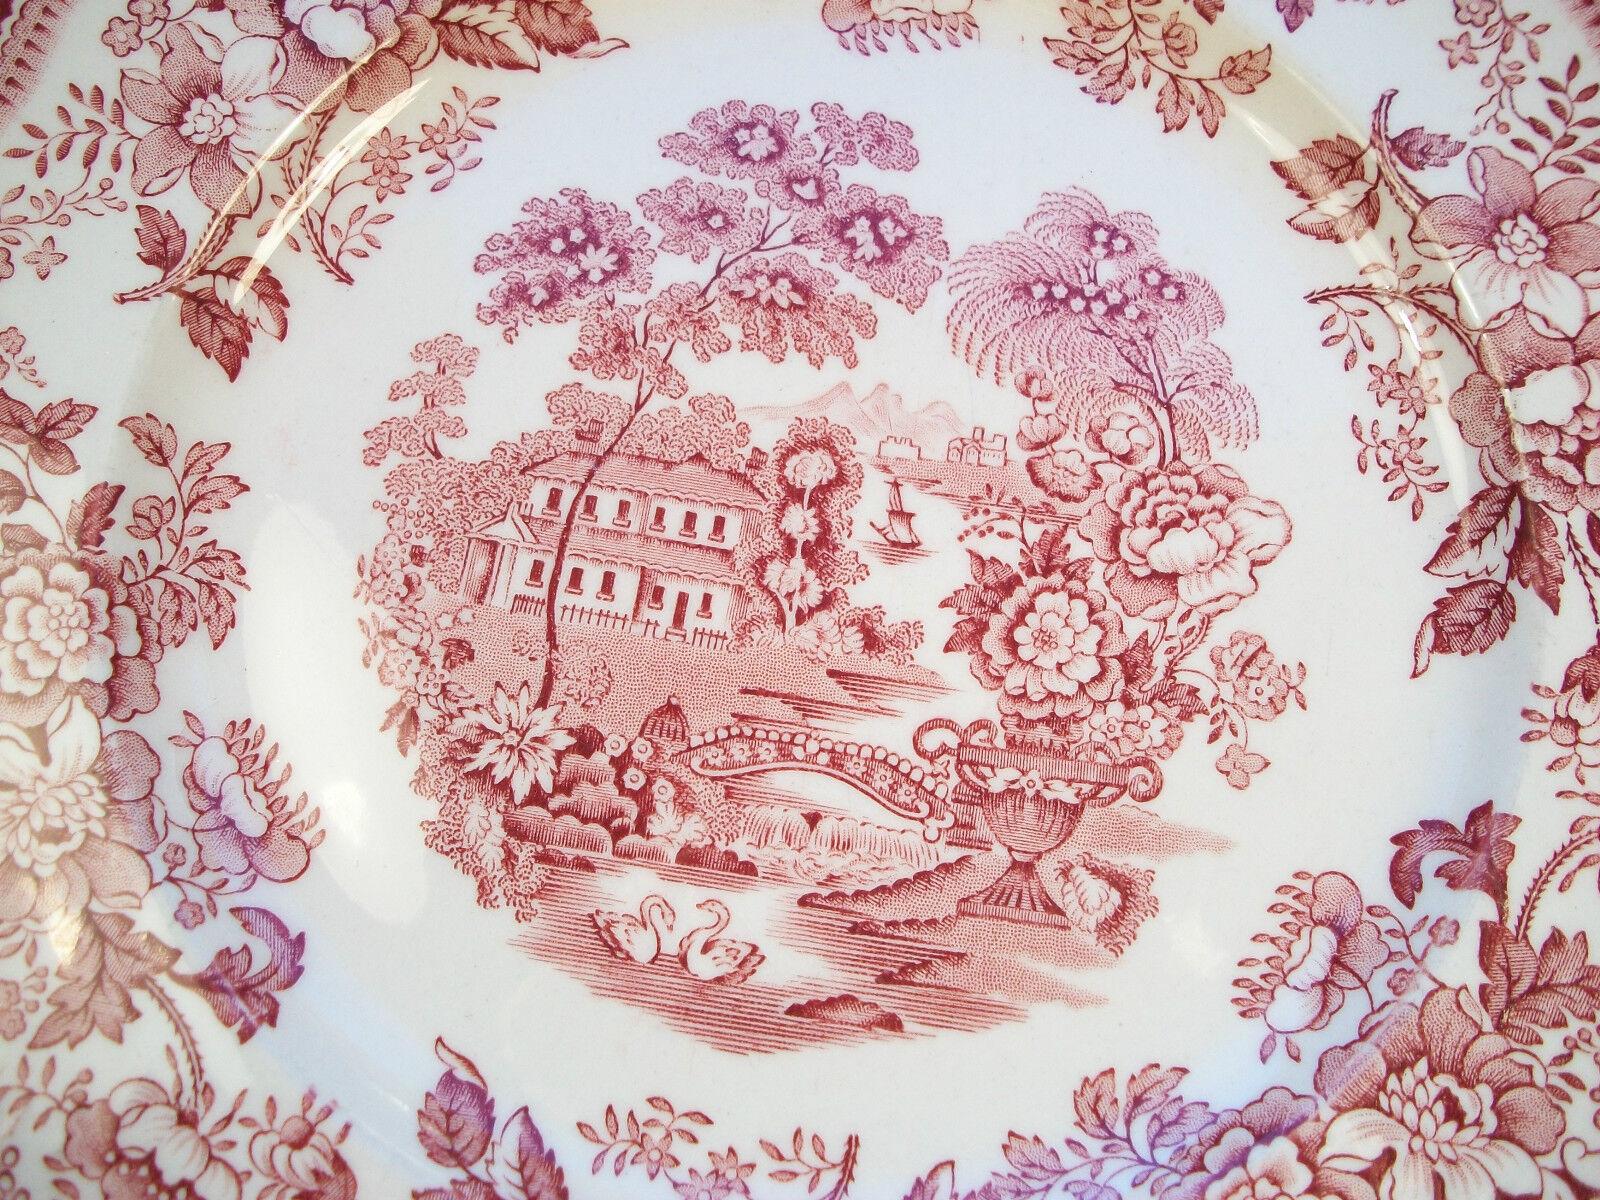 ROYAL STAFFORDSHIRE (Manufacturer) - Clarice Cliff (Designer) - Tonquin (Pattern) - Red (Color) - Transfer decorated ceramic dinner plate - factory stamp verso - England/United Kingdom - early 20th century.

Good vintage condition - no loss - no